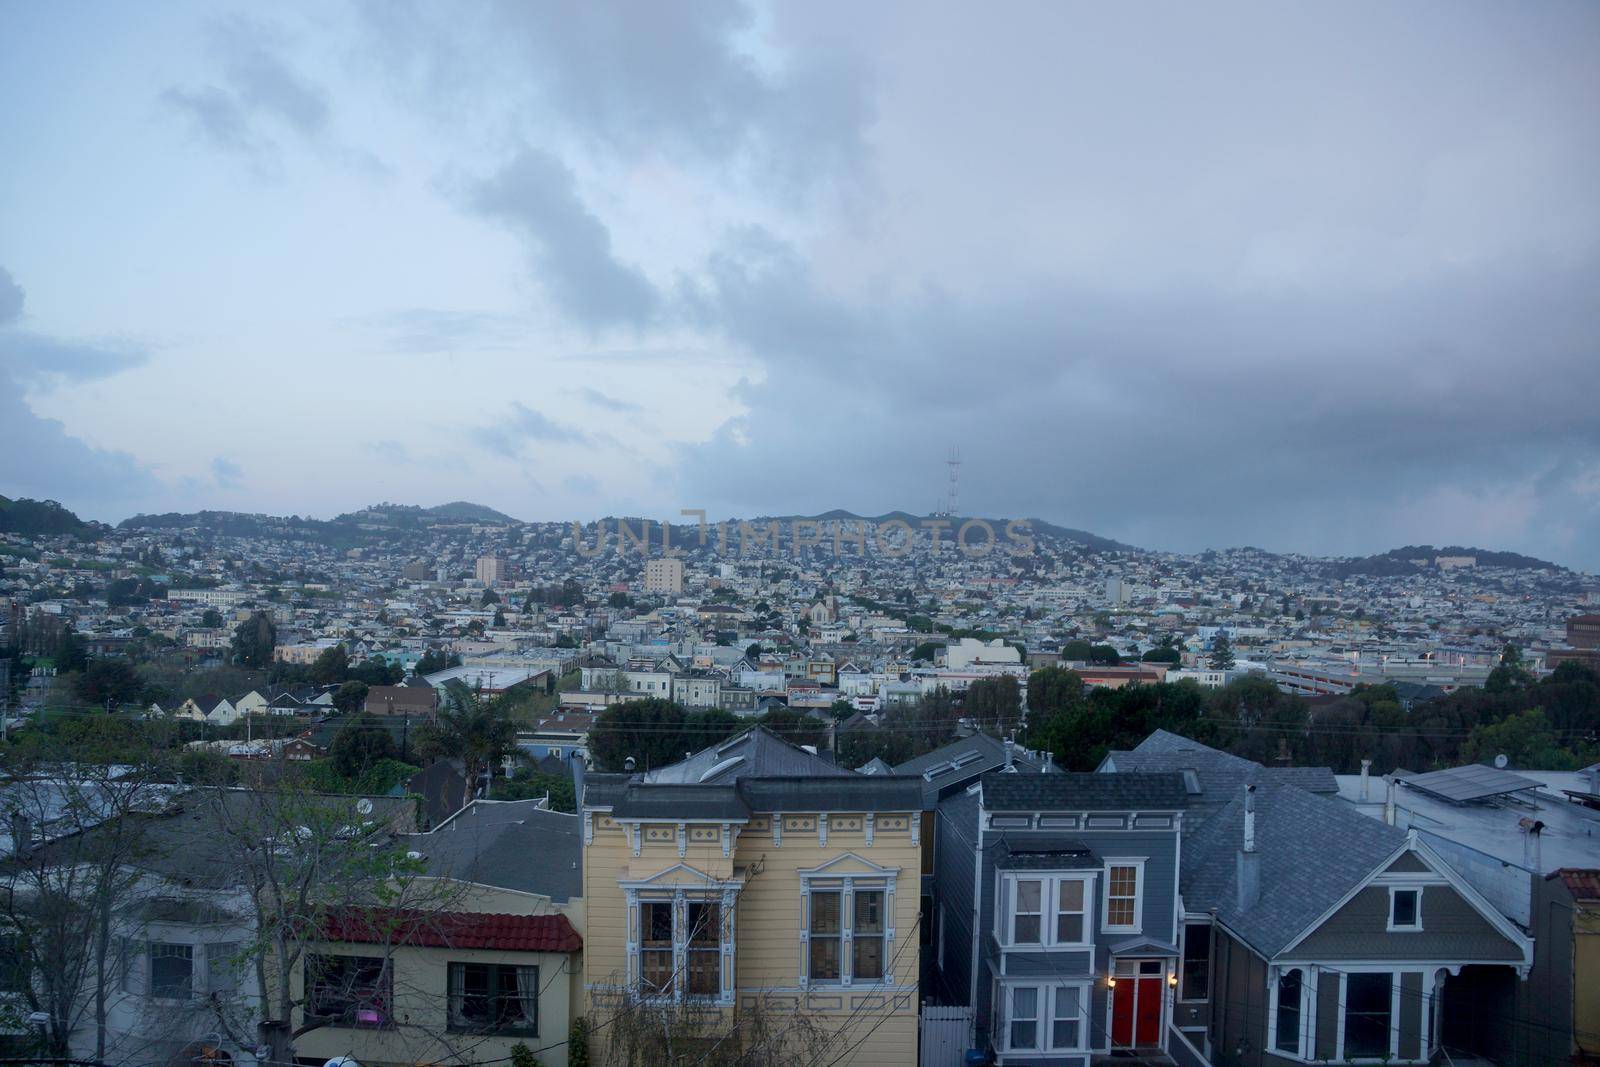 Aerial view of Houses, Cars. Cityscape, streets, and mountians of San Francisco by EricGBVD